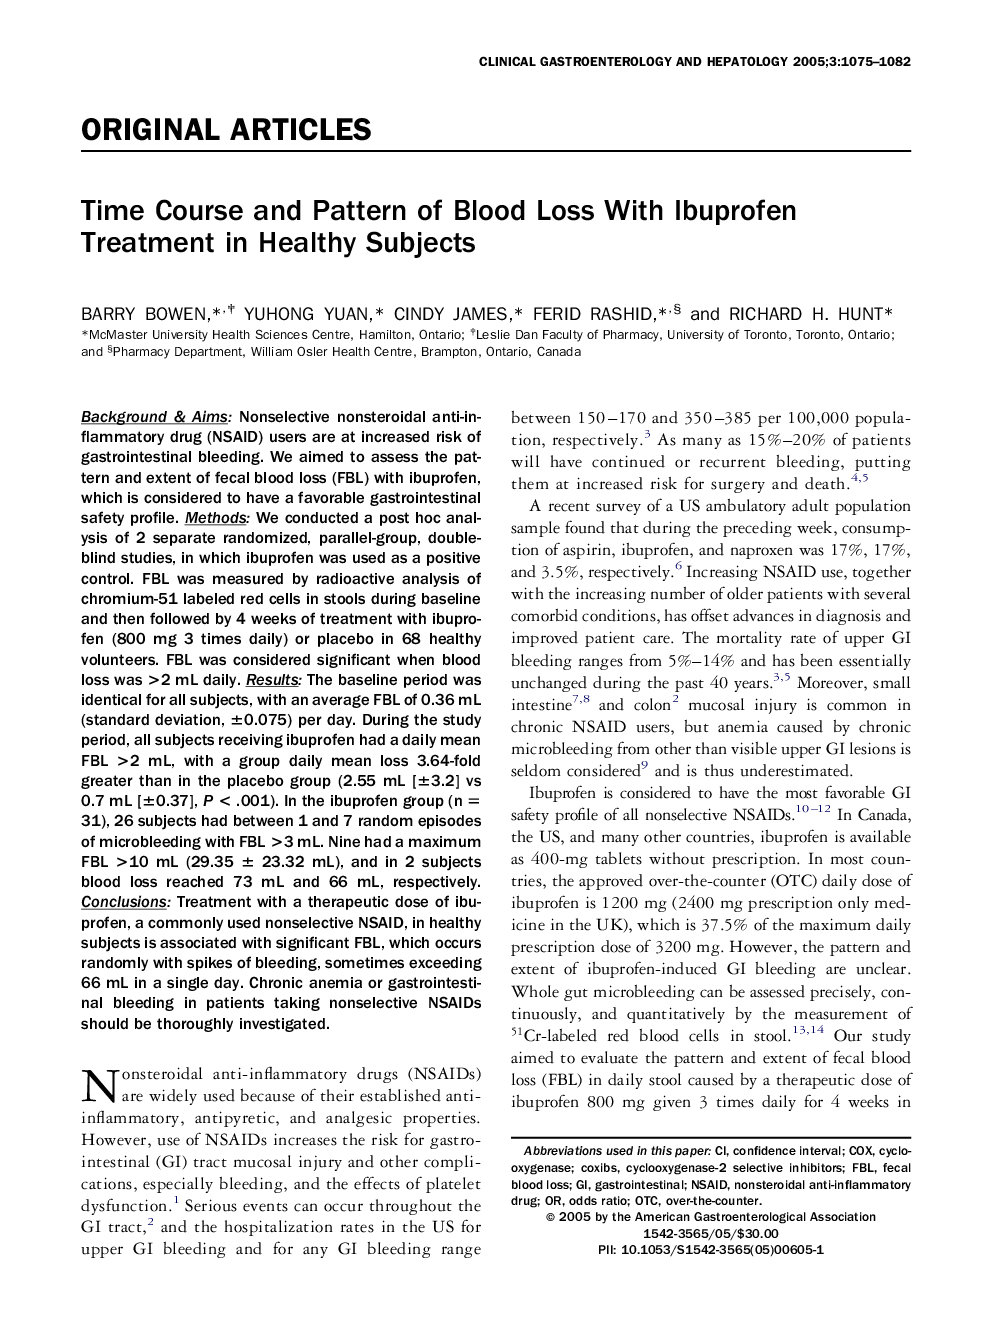 Time Course and Pattern of Blood Loss With Ibuprofen Treatment in Healthy Subjects